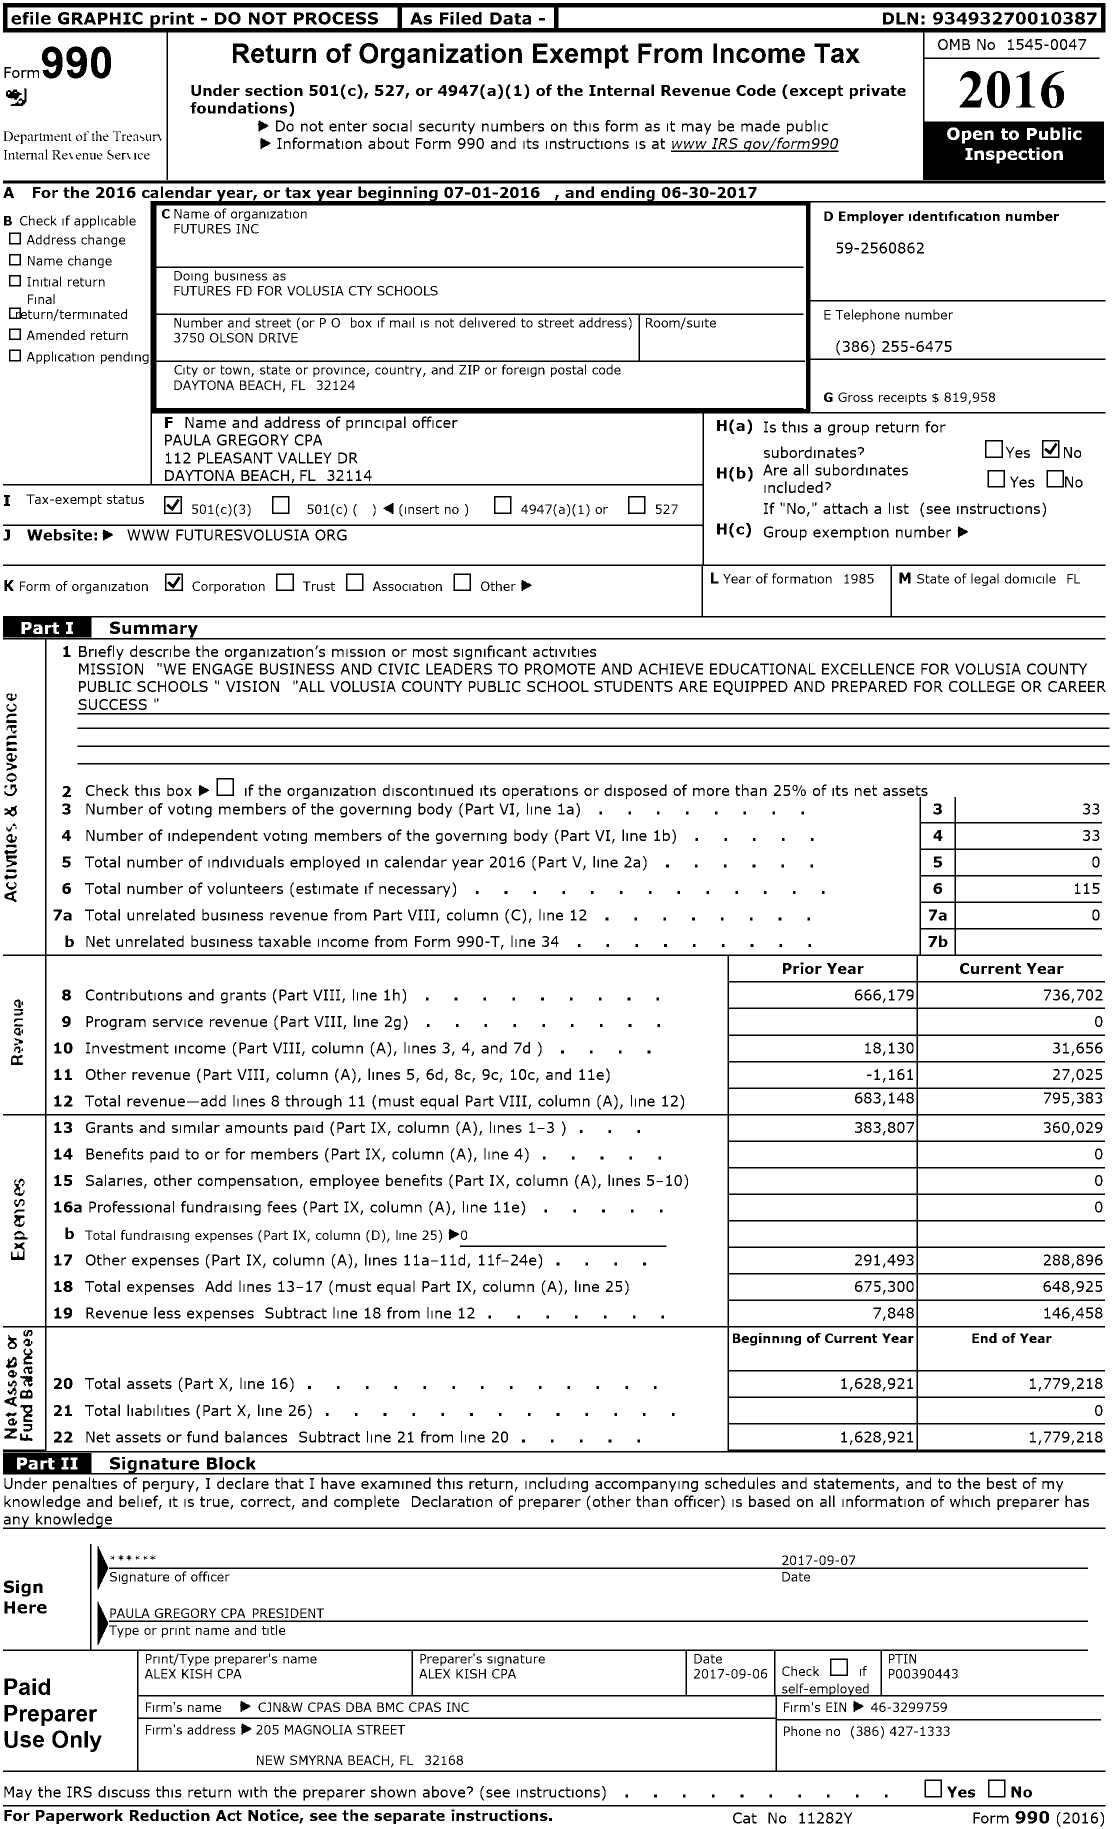 Image of first page of 2016 Form 990 for Futures Futures FD for Volusia Cty Schools